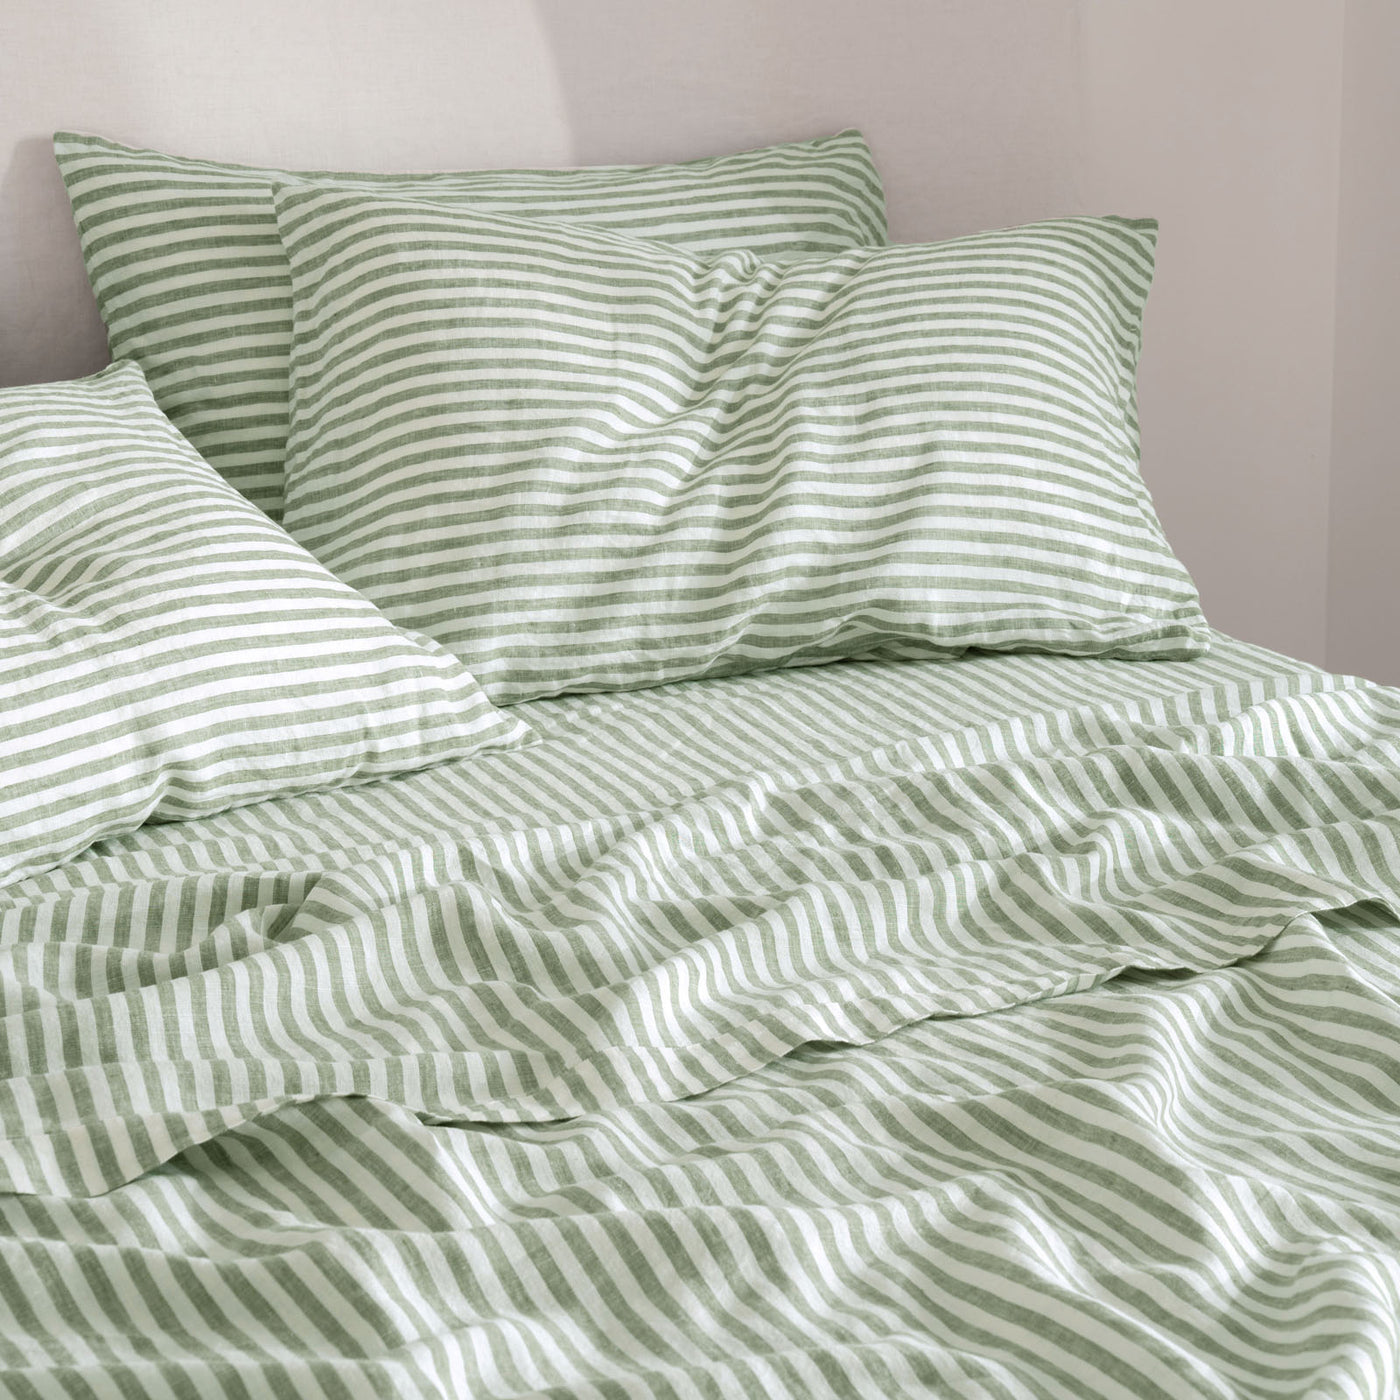 French Flax Linen Flat Sheet in Ivy Stripe